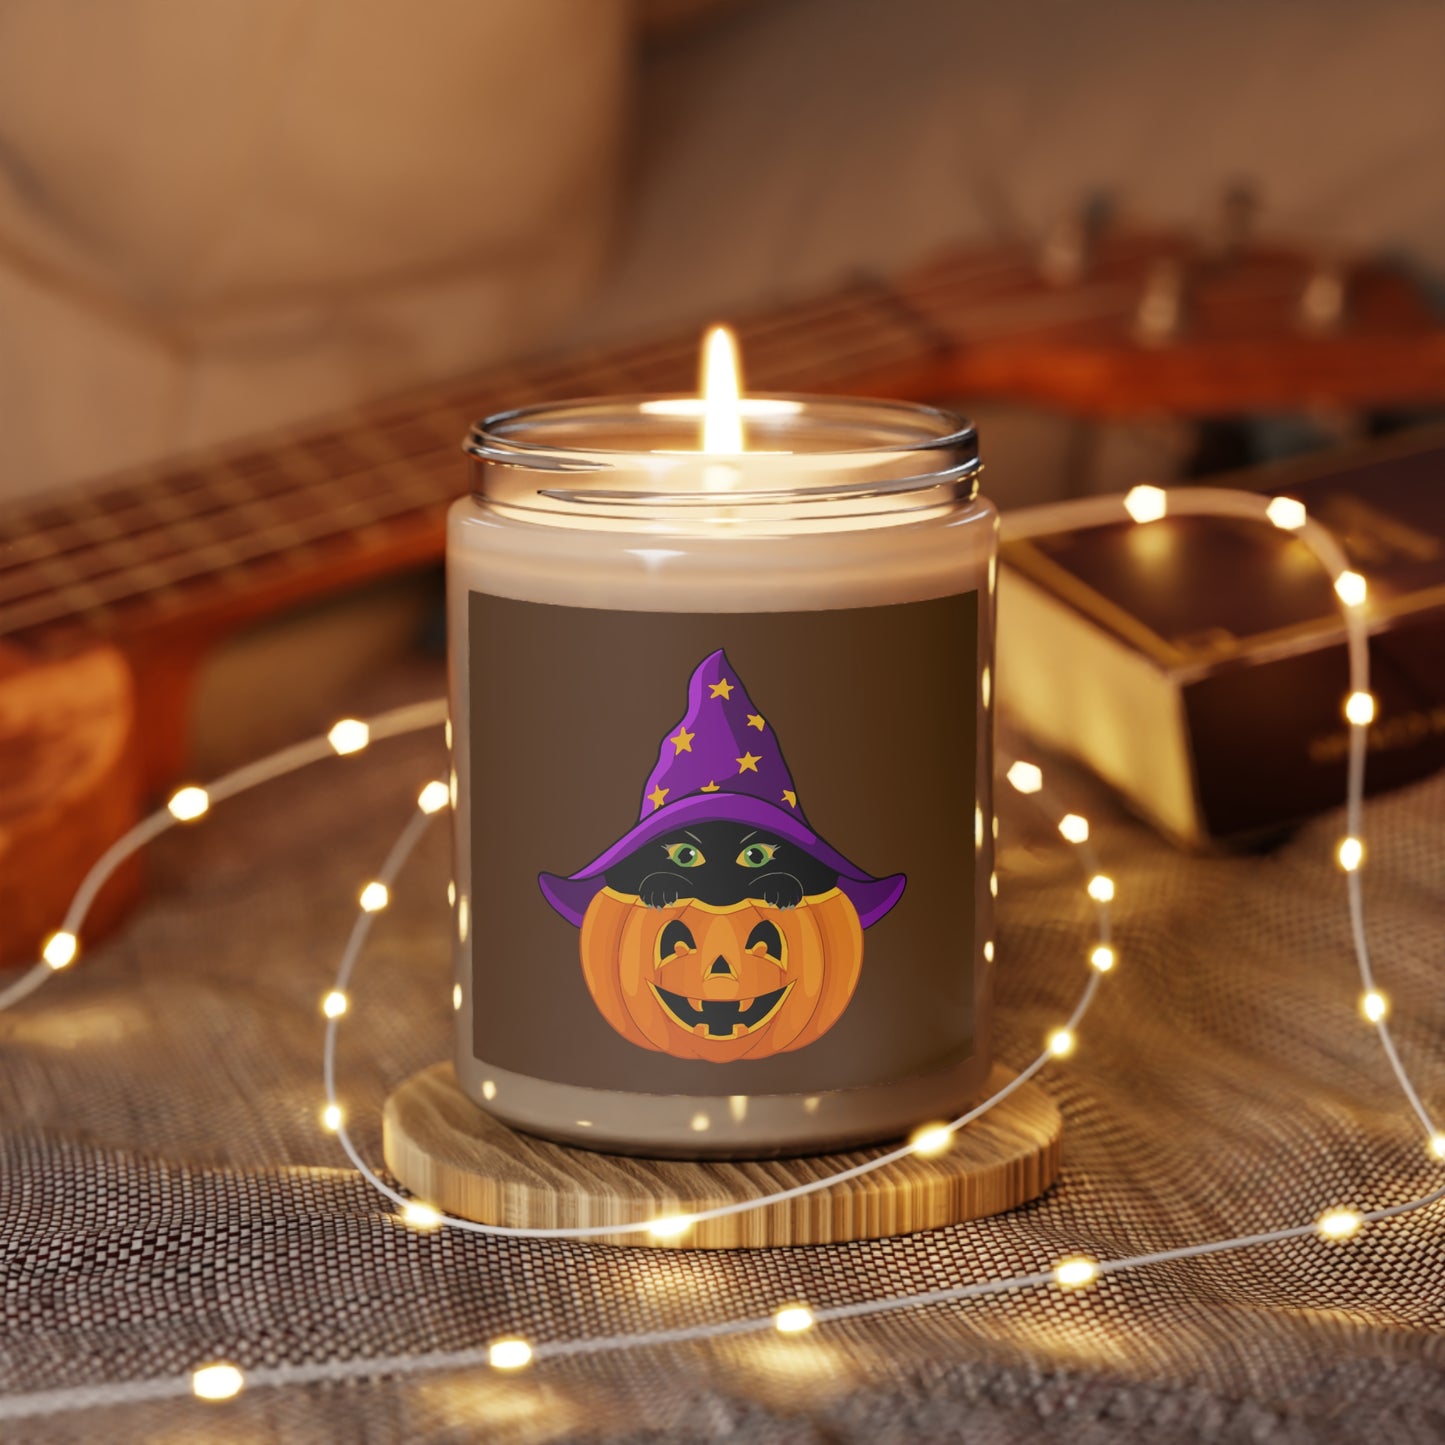 Mock up of the candle surrounded by white fairy lights